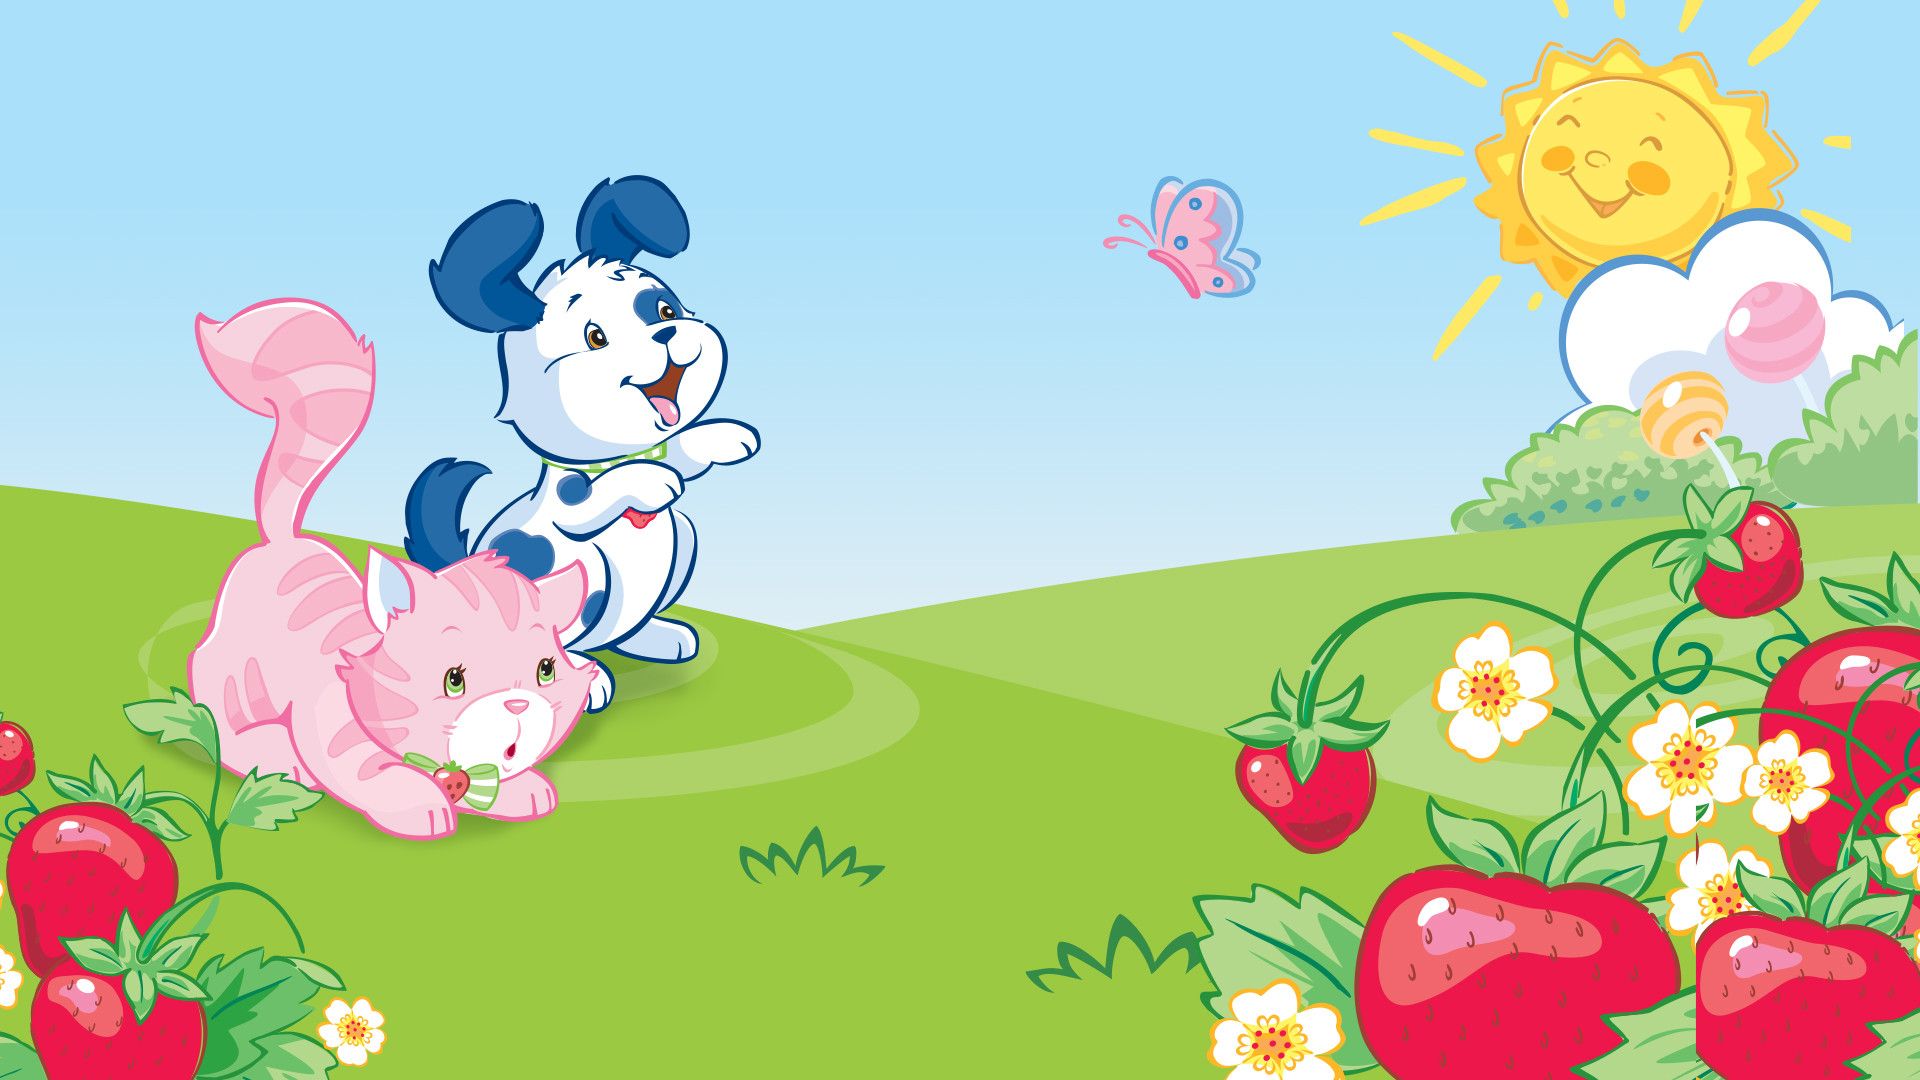 Strawberry Shortcake Computer Wallpapers - Wallpaper Cave
 Strawberry Shortcake Now